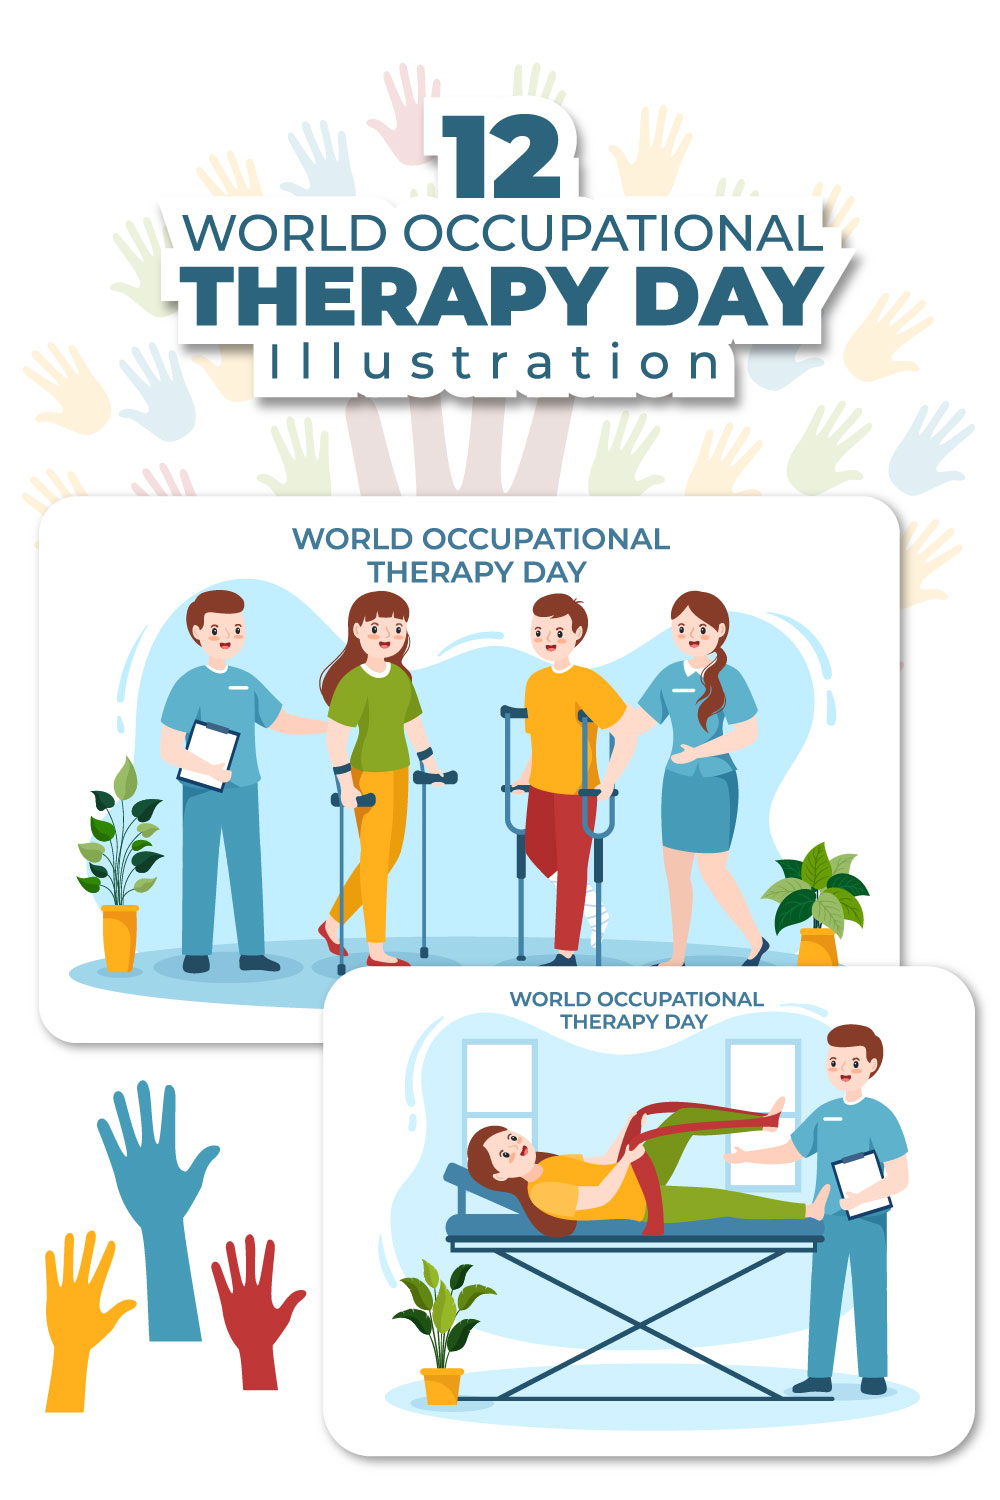 12 World Occupational Therapy Day Illustration Pinterest Image.